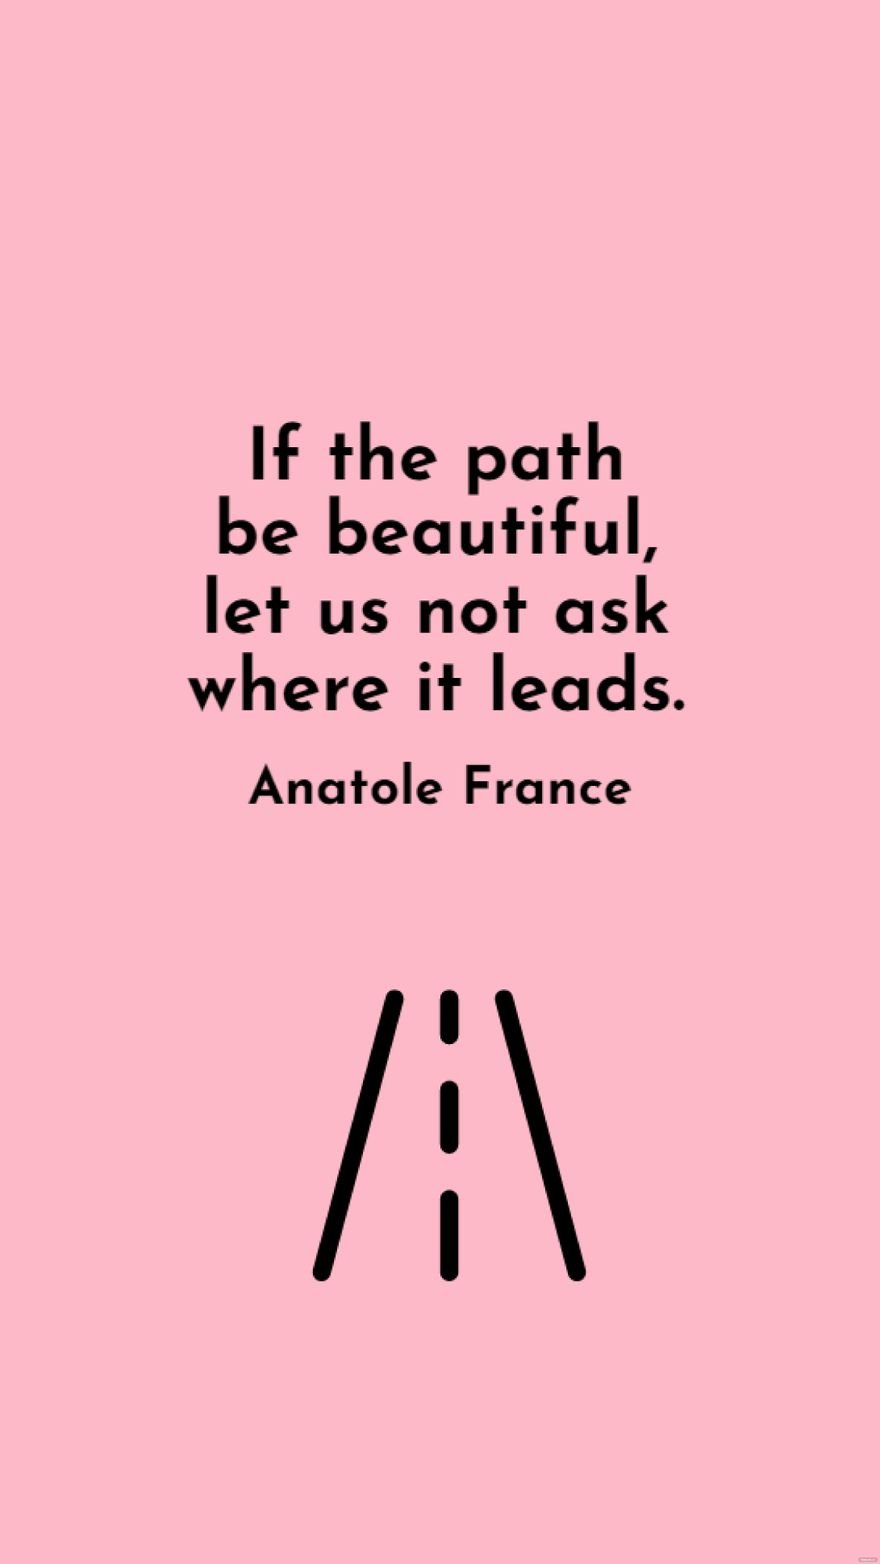 Free Anatole France - If the path be beautiful, let us not ask where it leads. in JPG